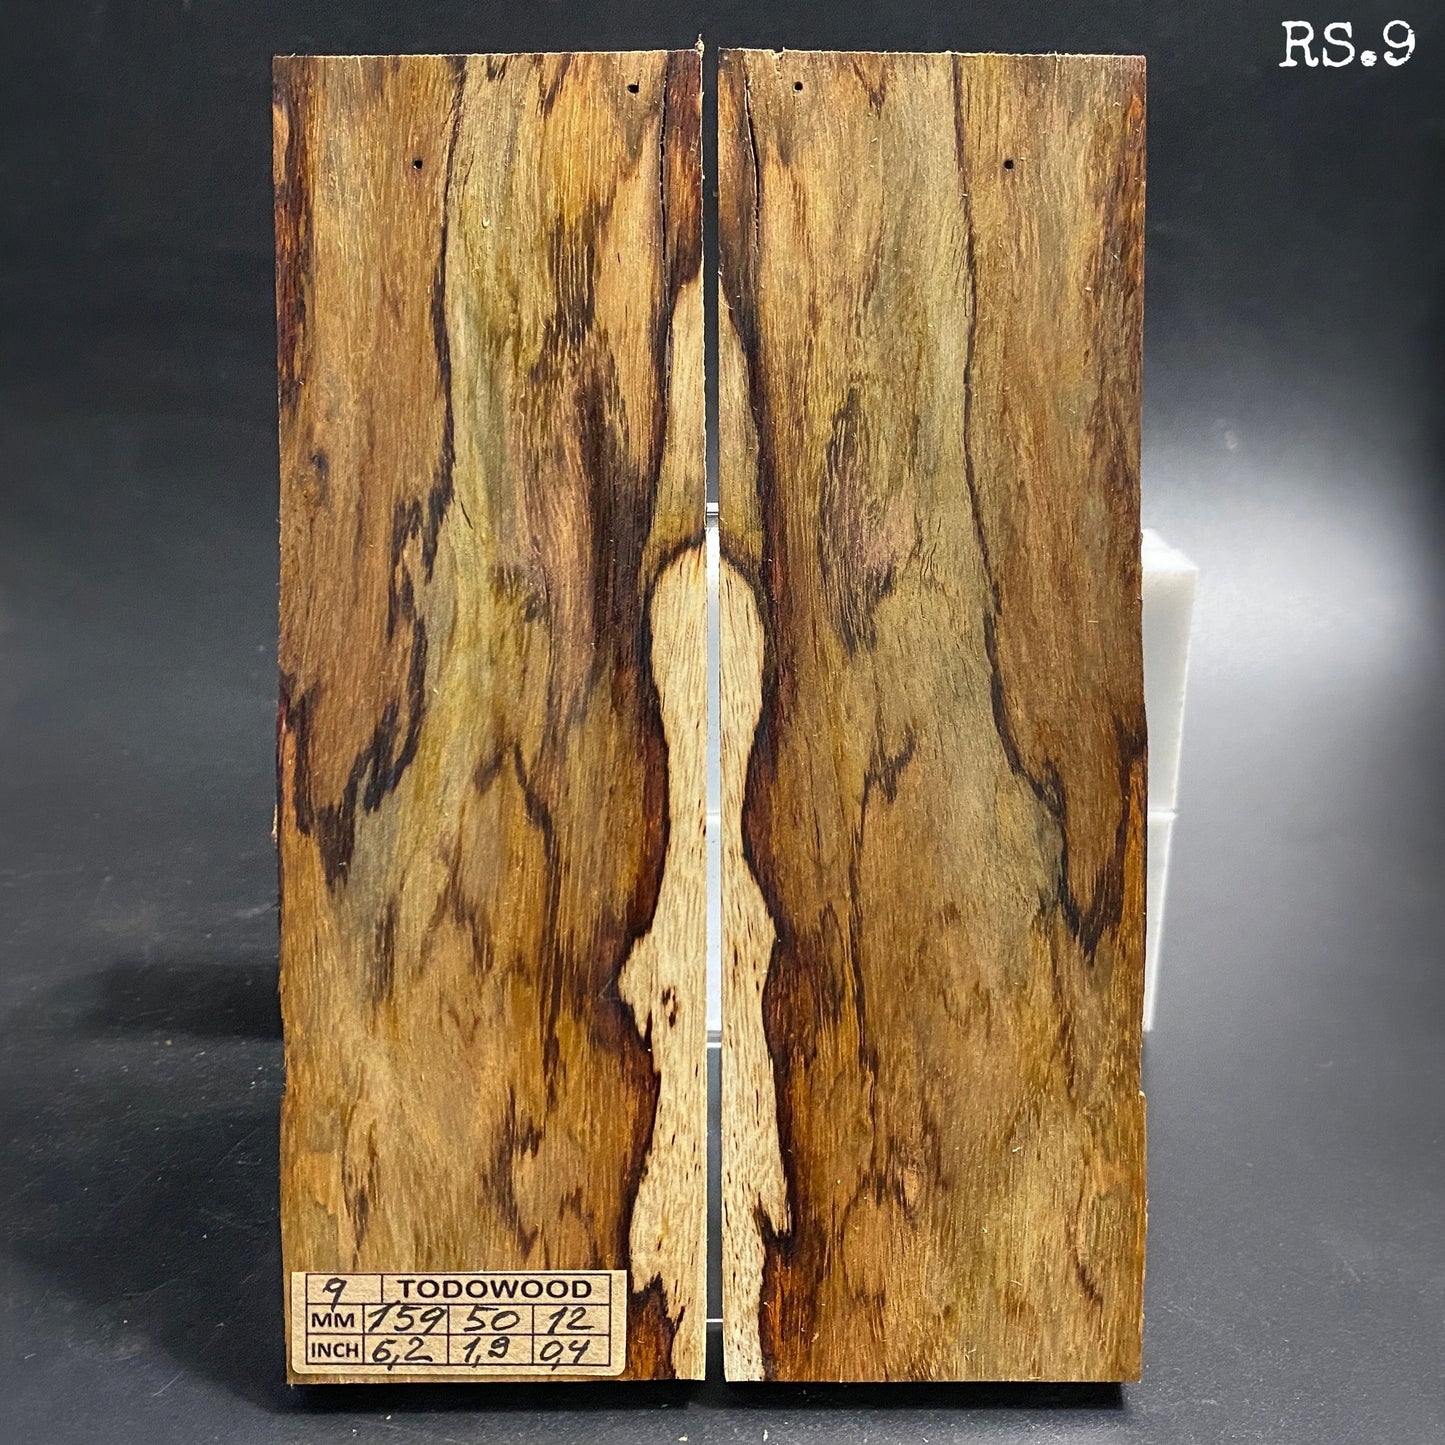 ROSEWOOD SPALTED, Mirror Blanks for Crafting, Woodworking, Precious Woods. France Stock. #RS.9